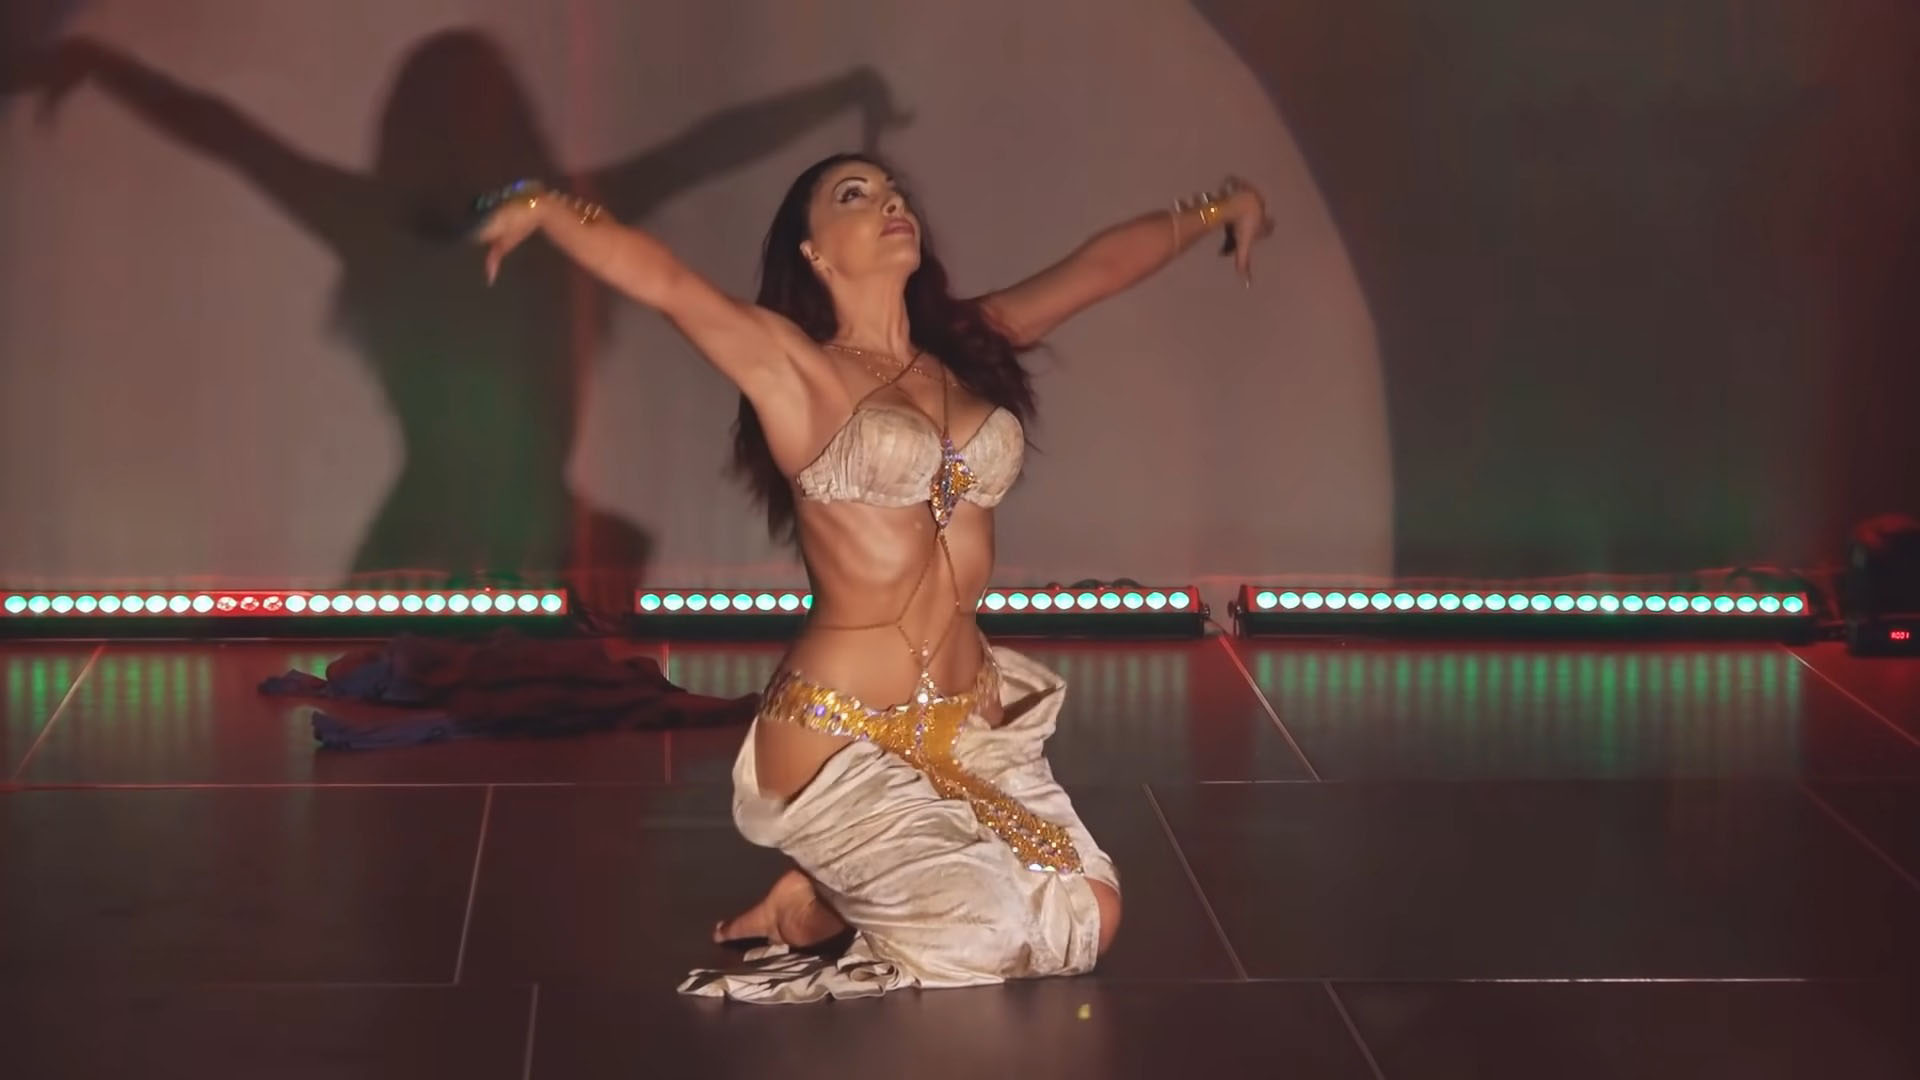 Woman sitting on stage with her arms raised looking up while belly dancing